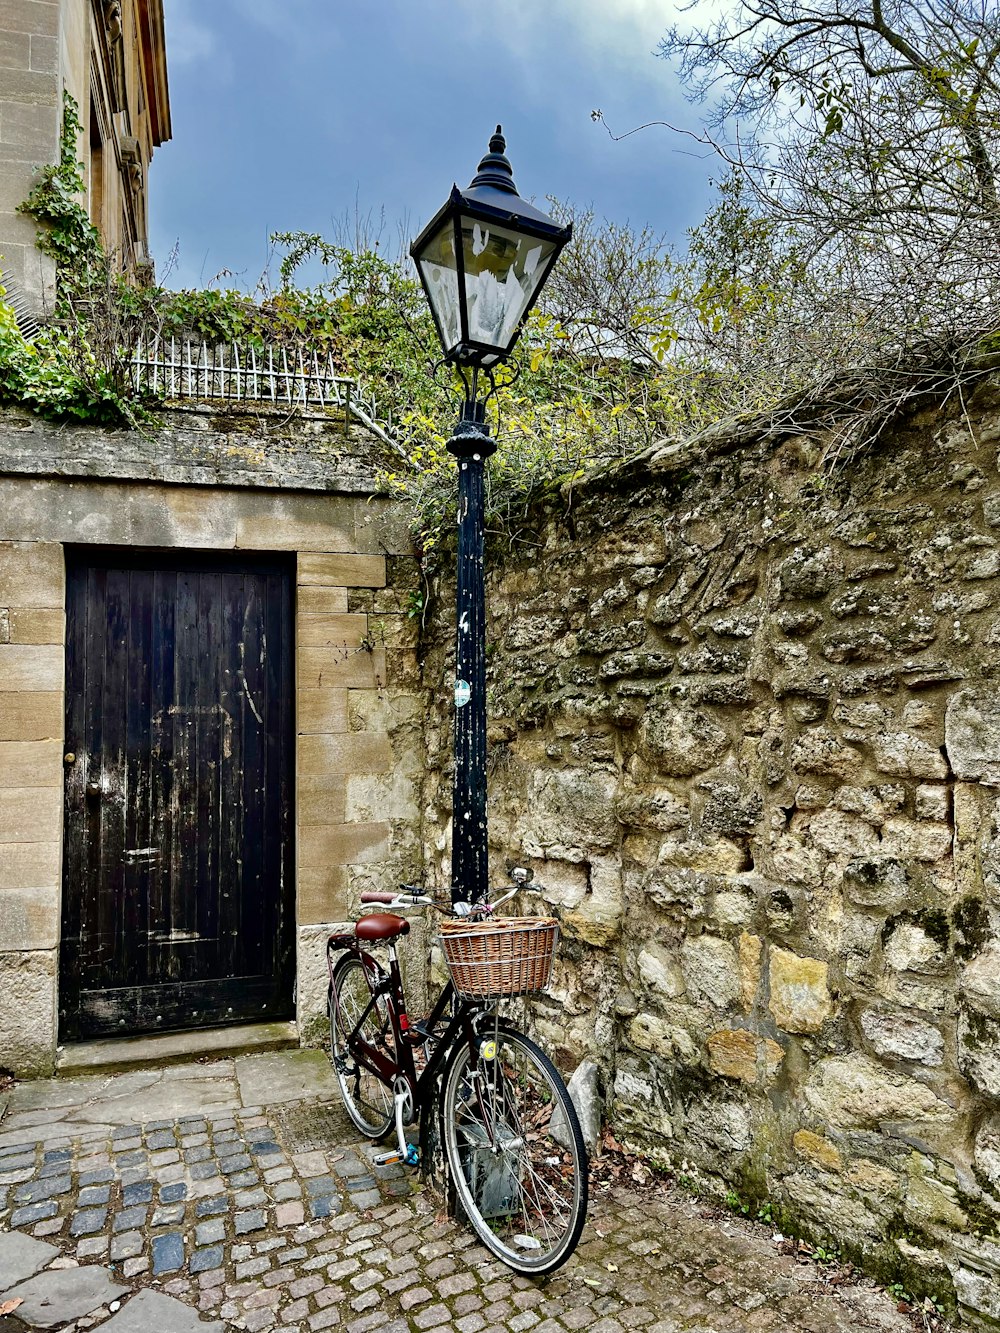 a bicycle parked next to a lamp post